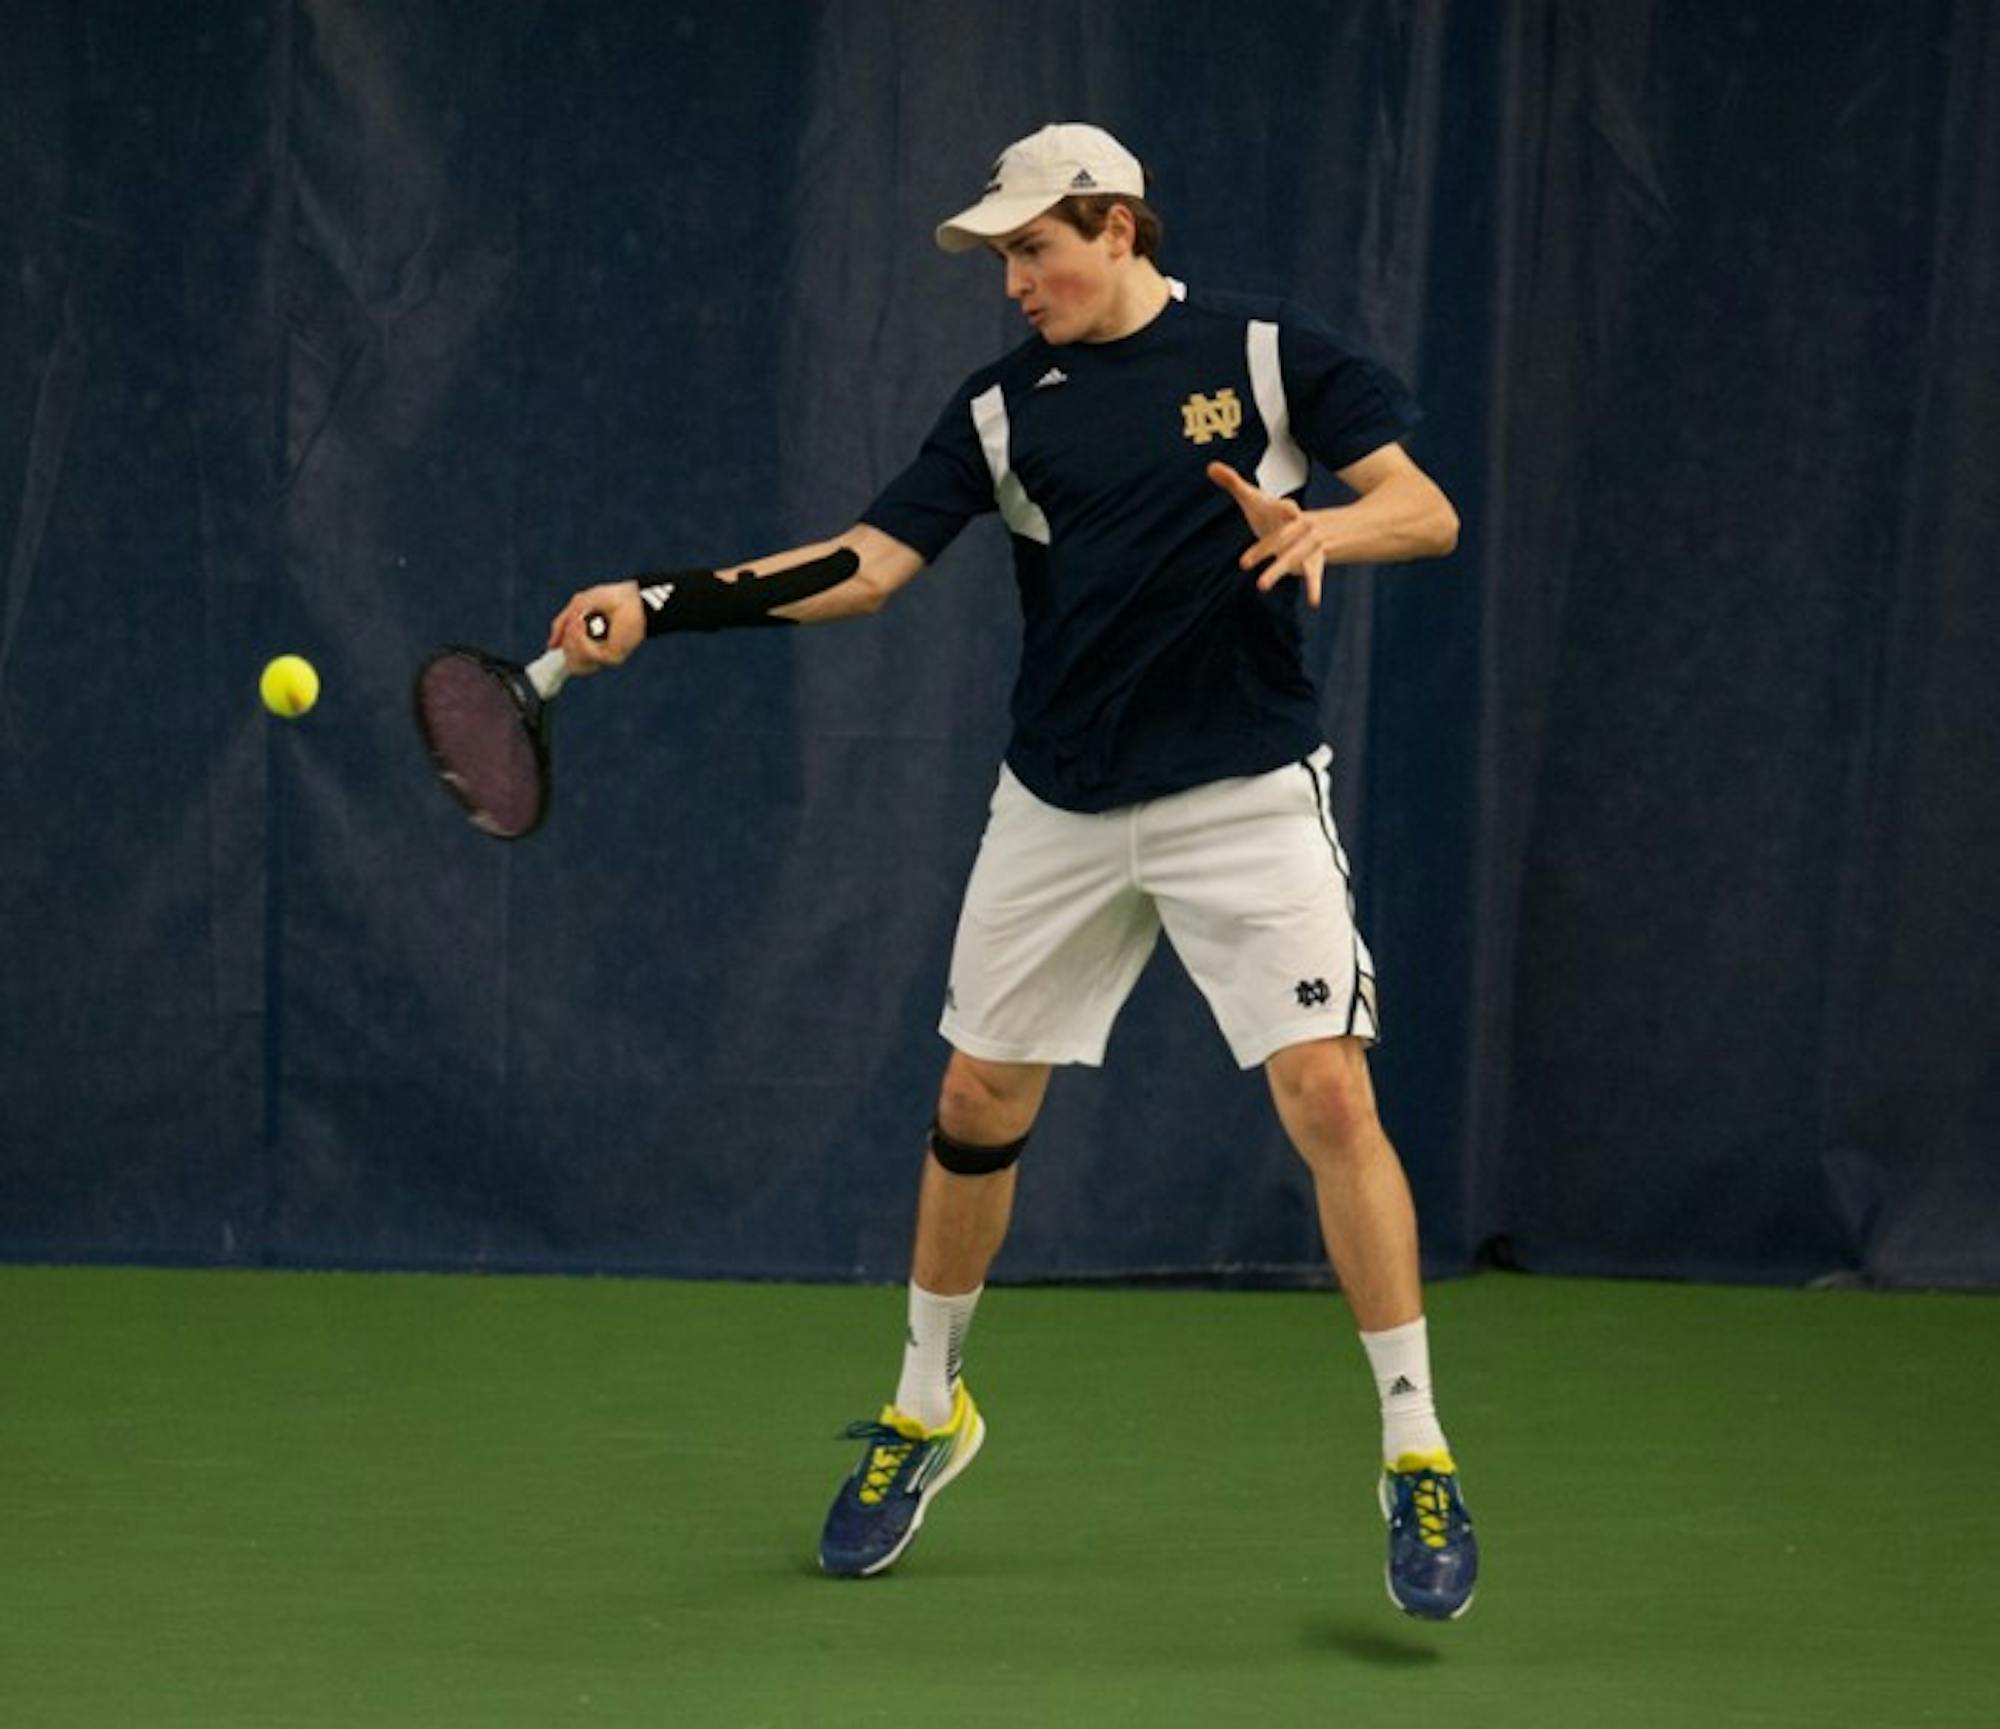 Irish sophomore Eric Schnurrenburger returns the ball during Notre Dame's victory over Kentucky on Feb. 2. Through Schnurrenburger lost both his matches, the Irish still managed to beat the WIldcats 4-3.